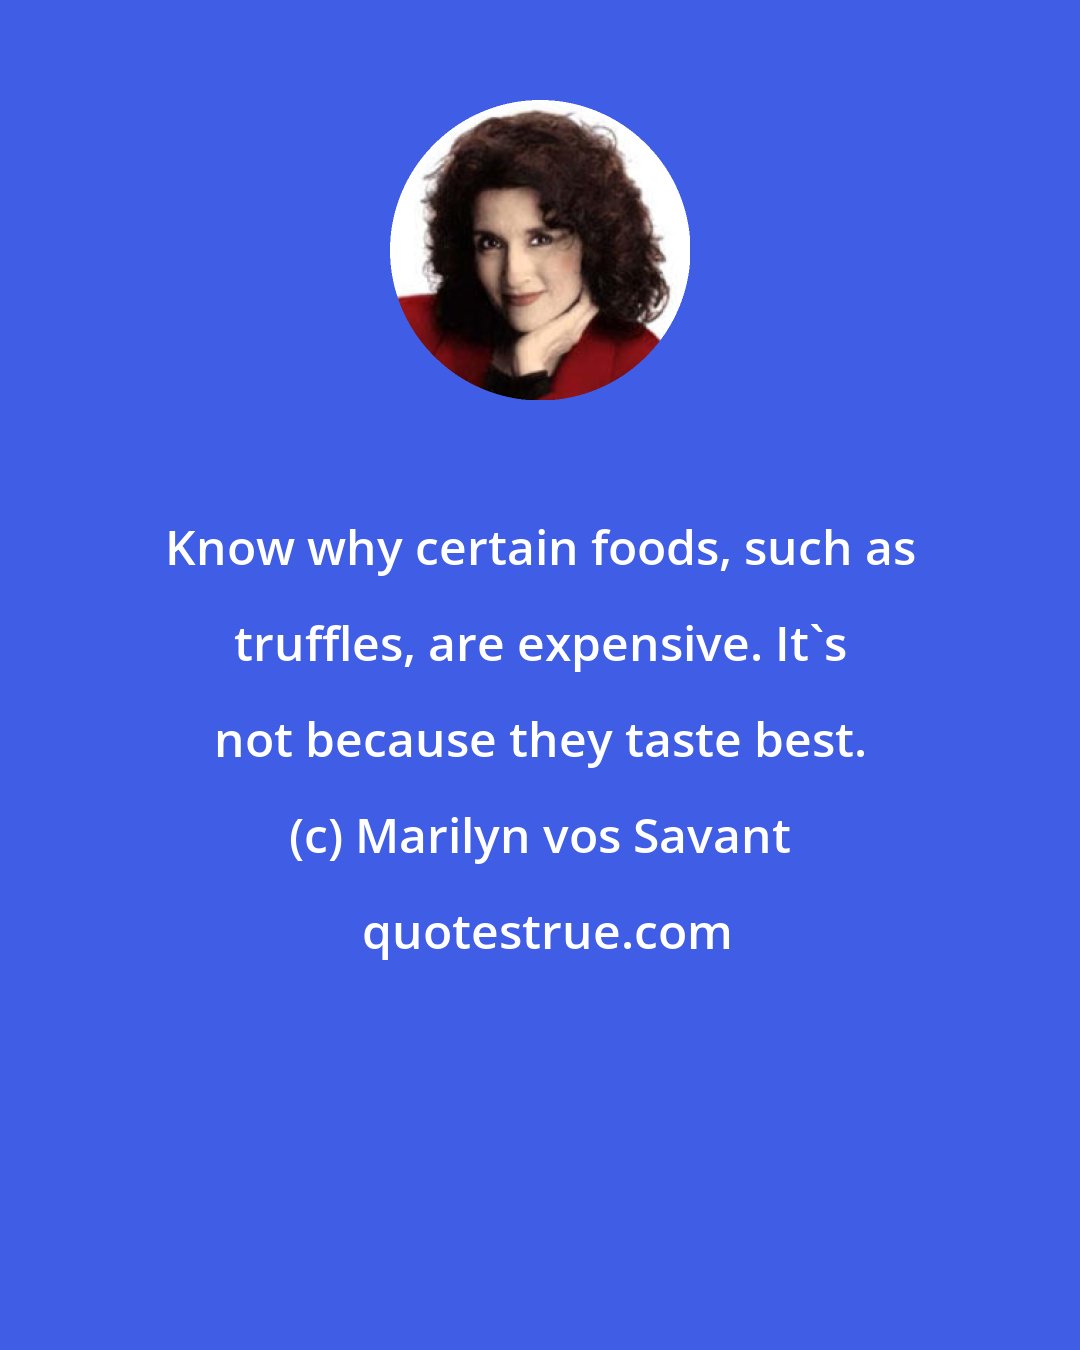 Marilyn vos Savant: Know why certain foods, such as truffles, are expensive. It's not because they taste best.